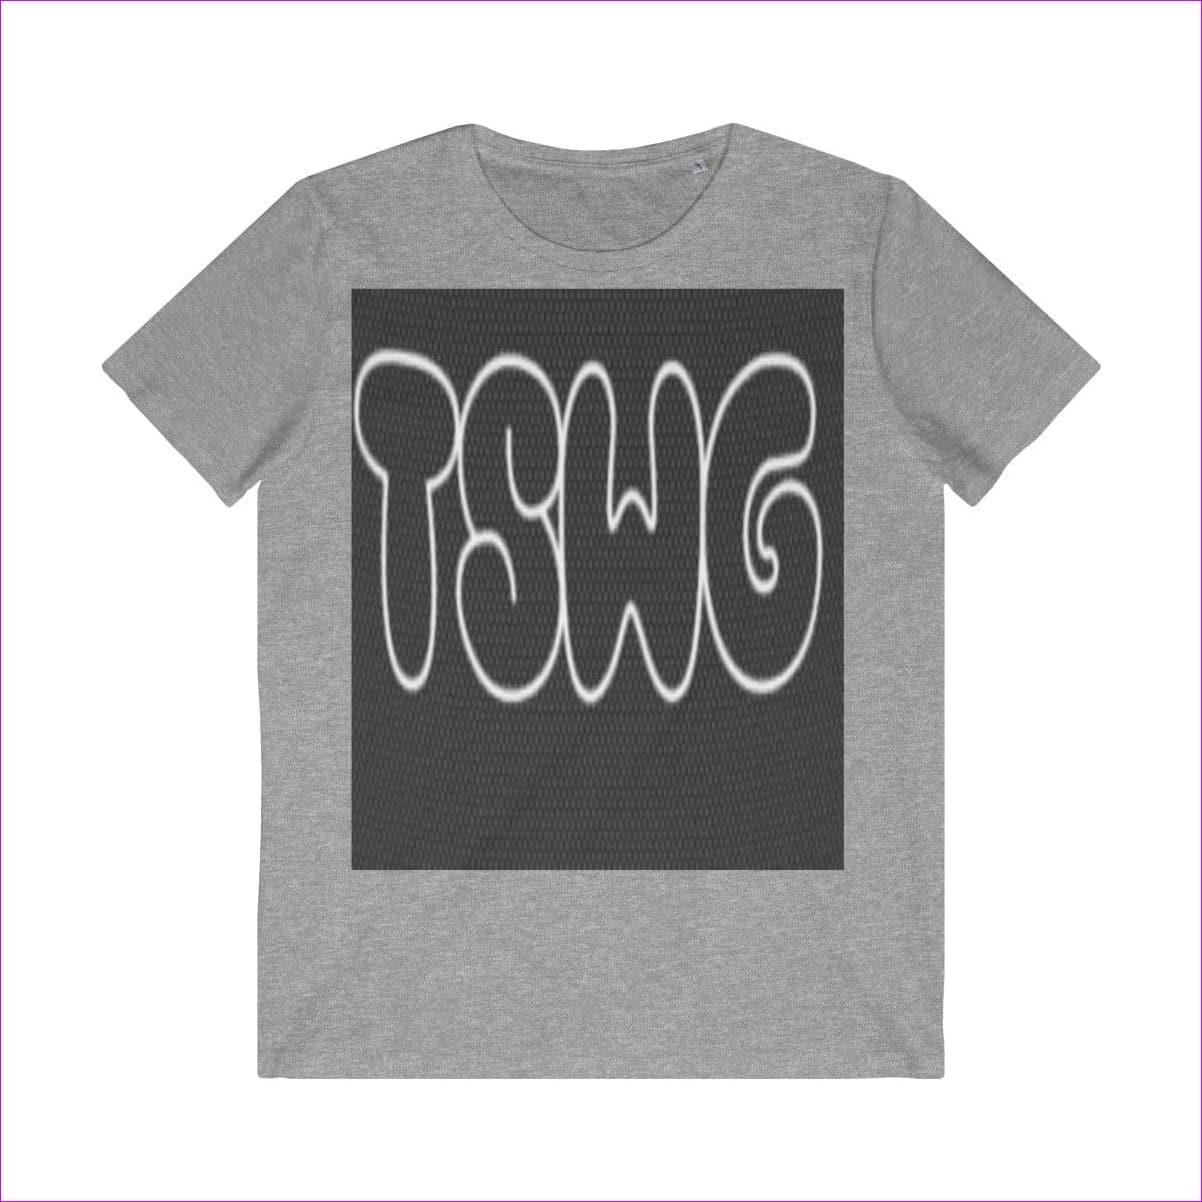 Heather Grey TSWG ( Tough Smooth Well Groomed) Men's Organic Tee - T-Shirt at TFC&H Co.